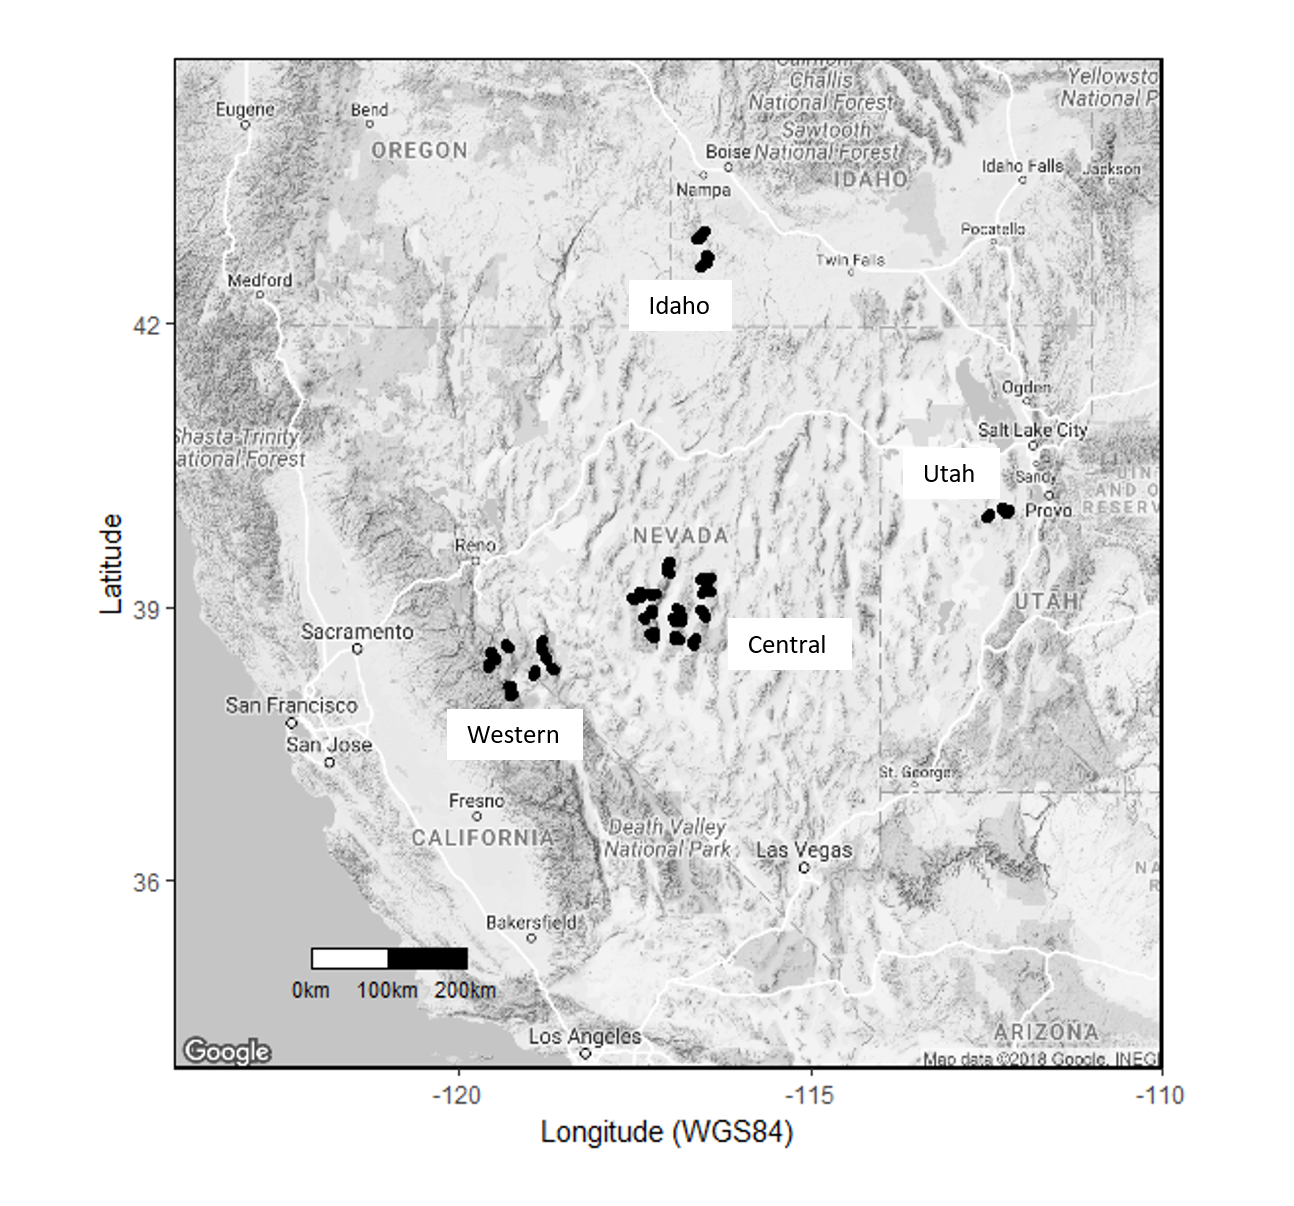 Areas in which we collect data in the Great Basin